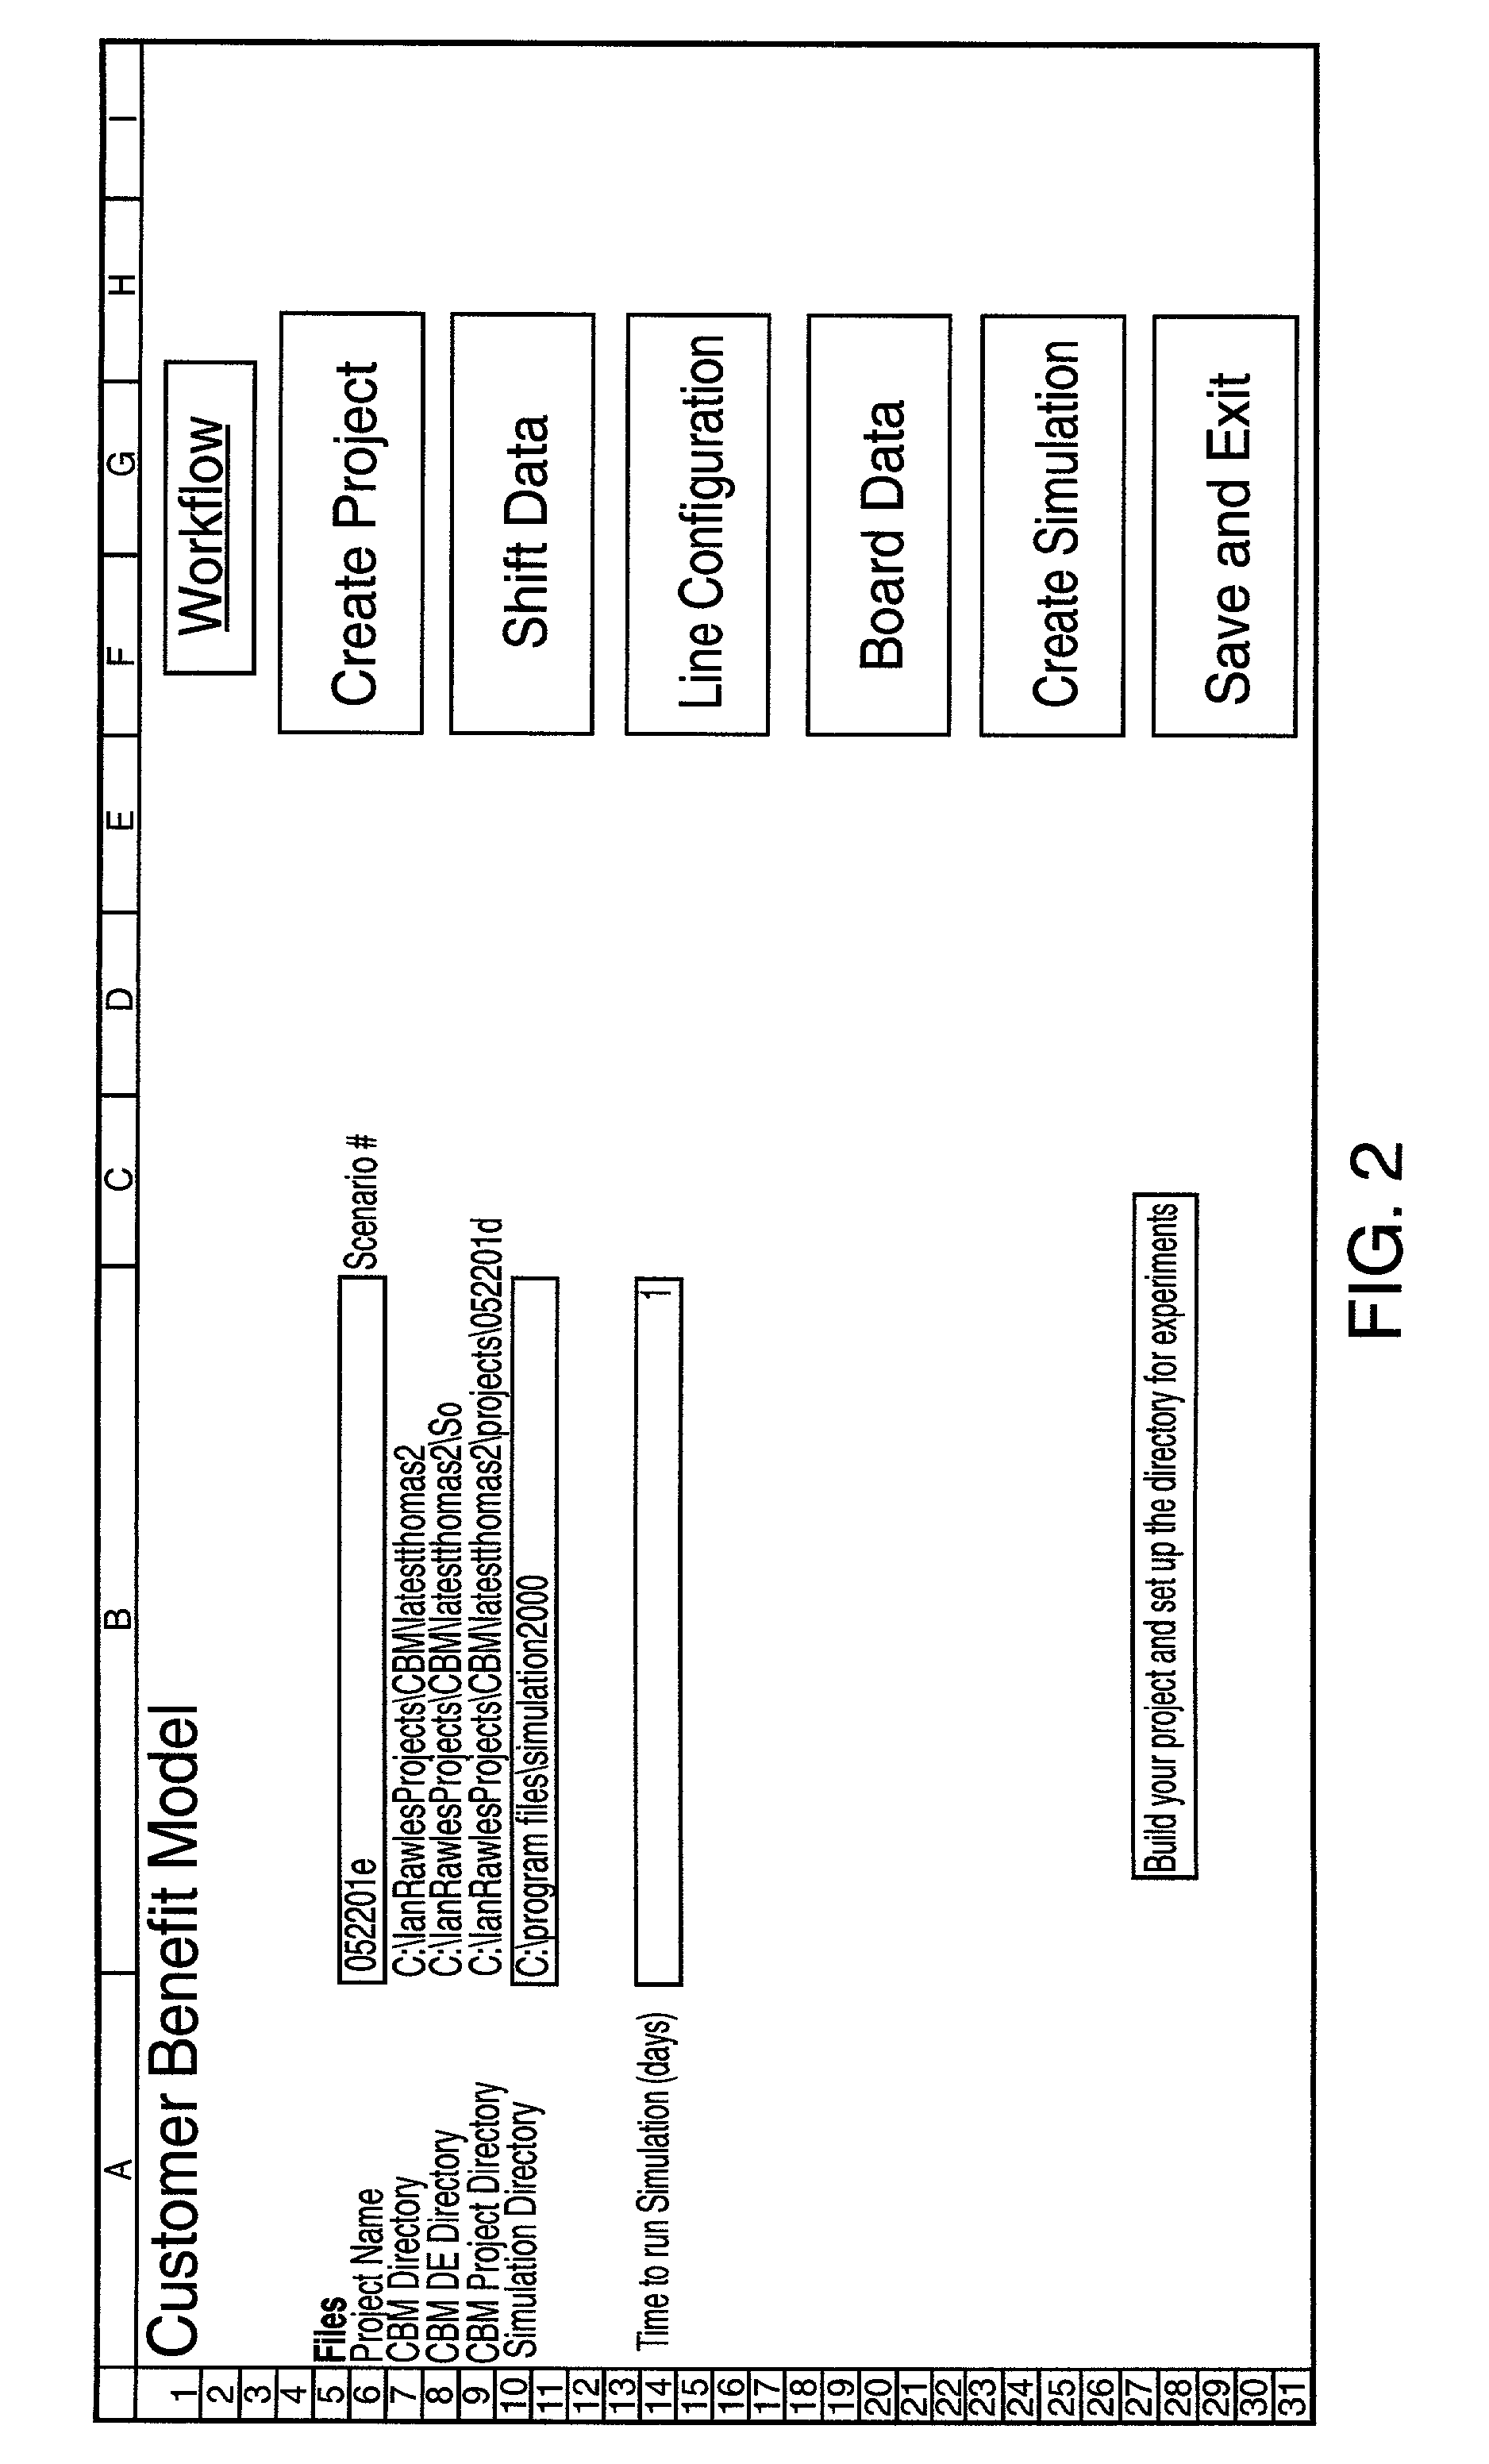 Electronics assembly systems customer benefit modeling tools and methods